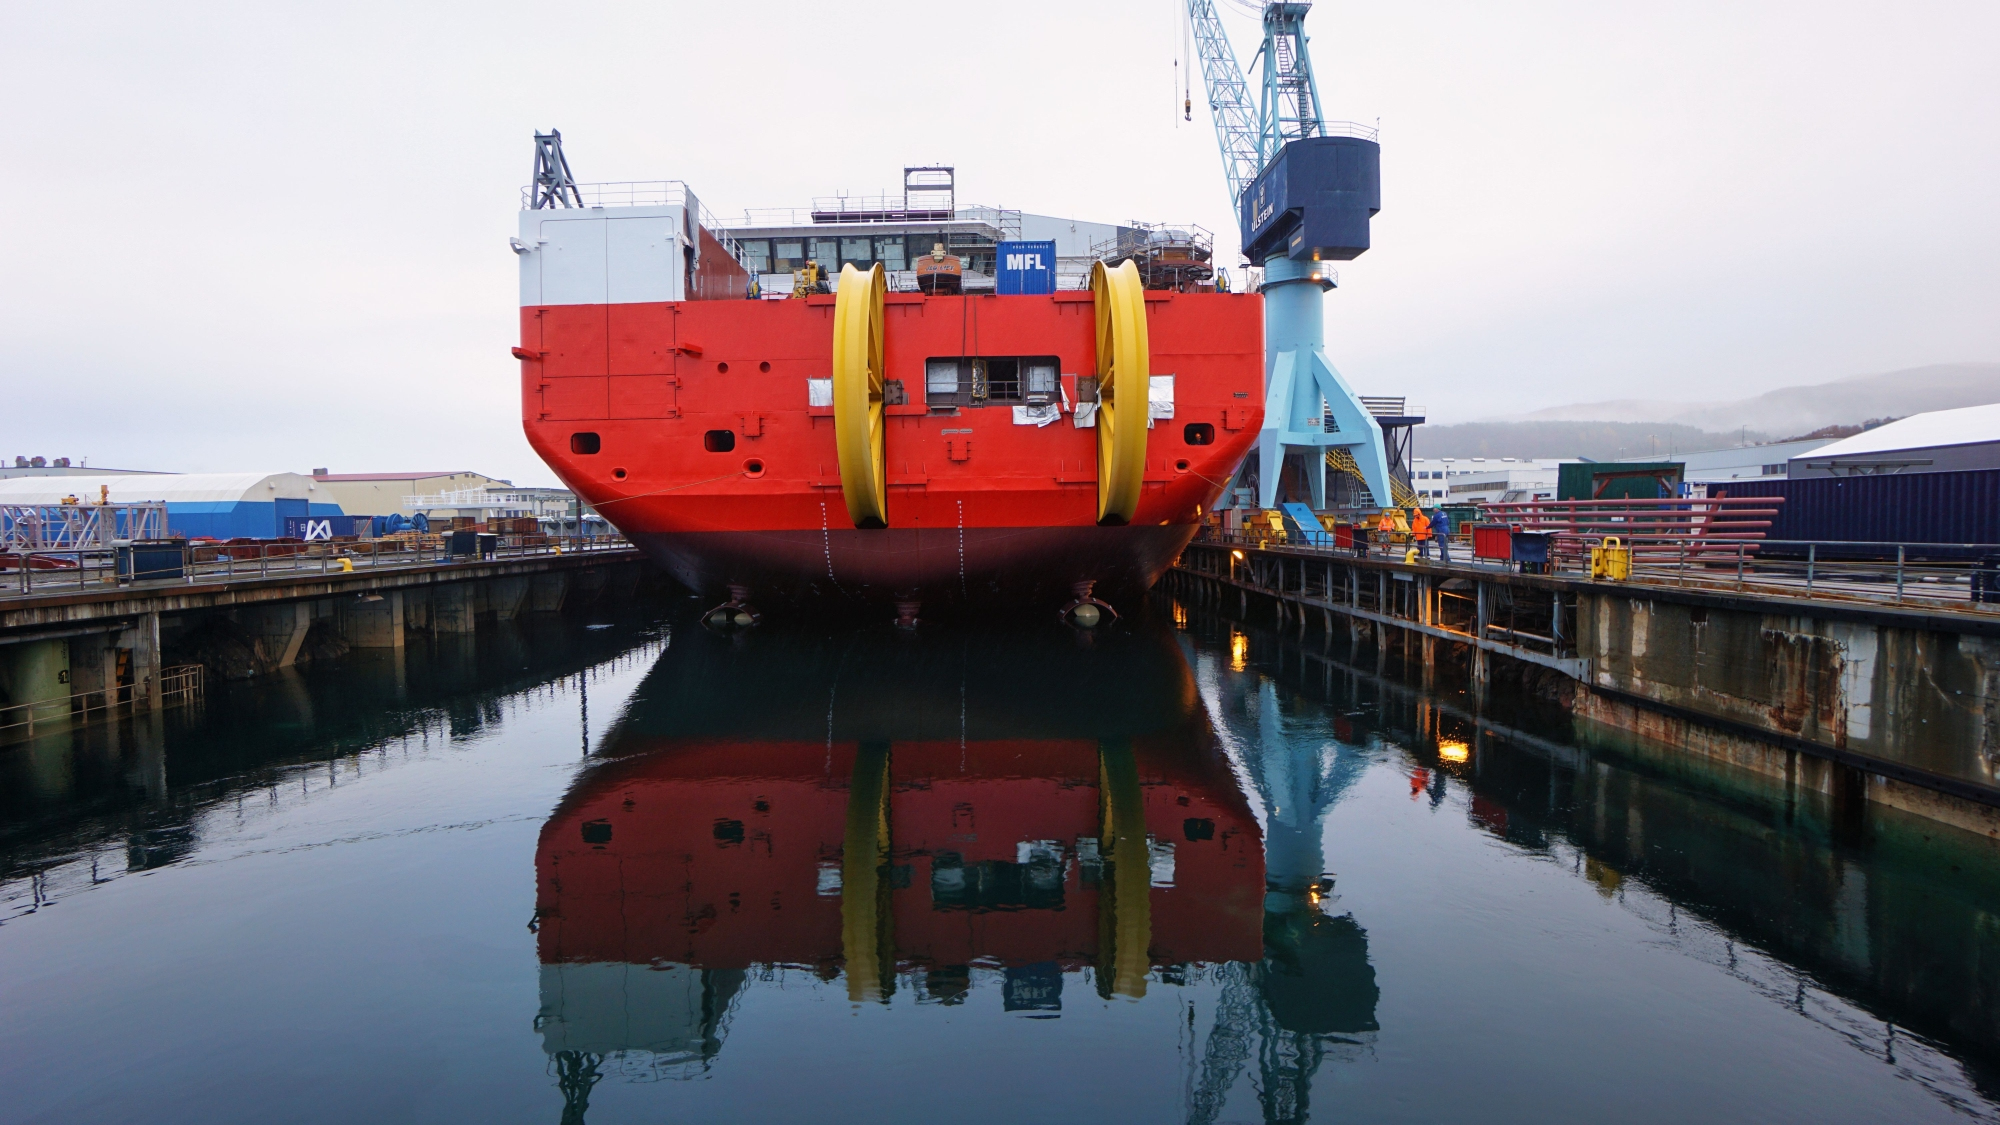 The two MAATS lay wheels protruding at the aft end of the Nexans Aurora. Photo: Daniel Osnes.